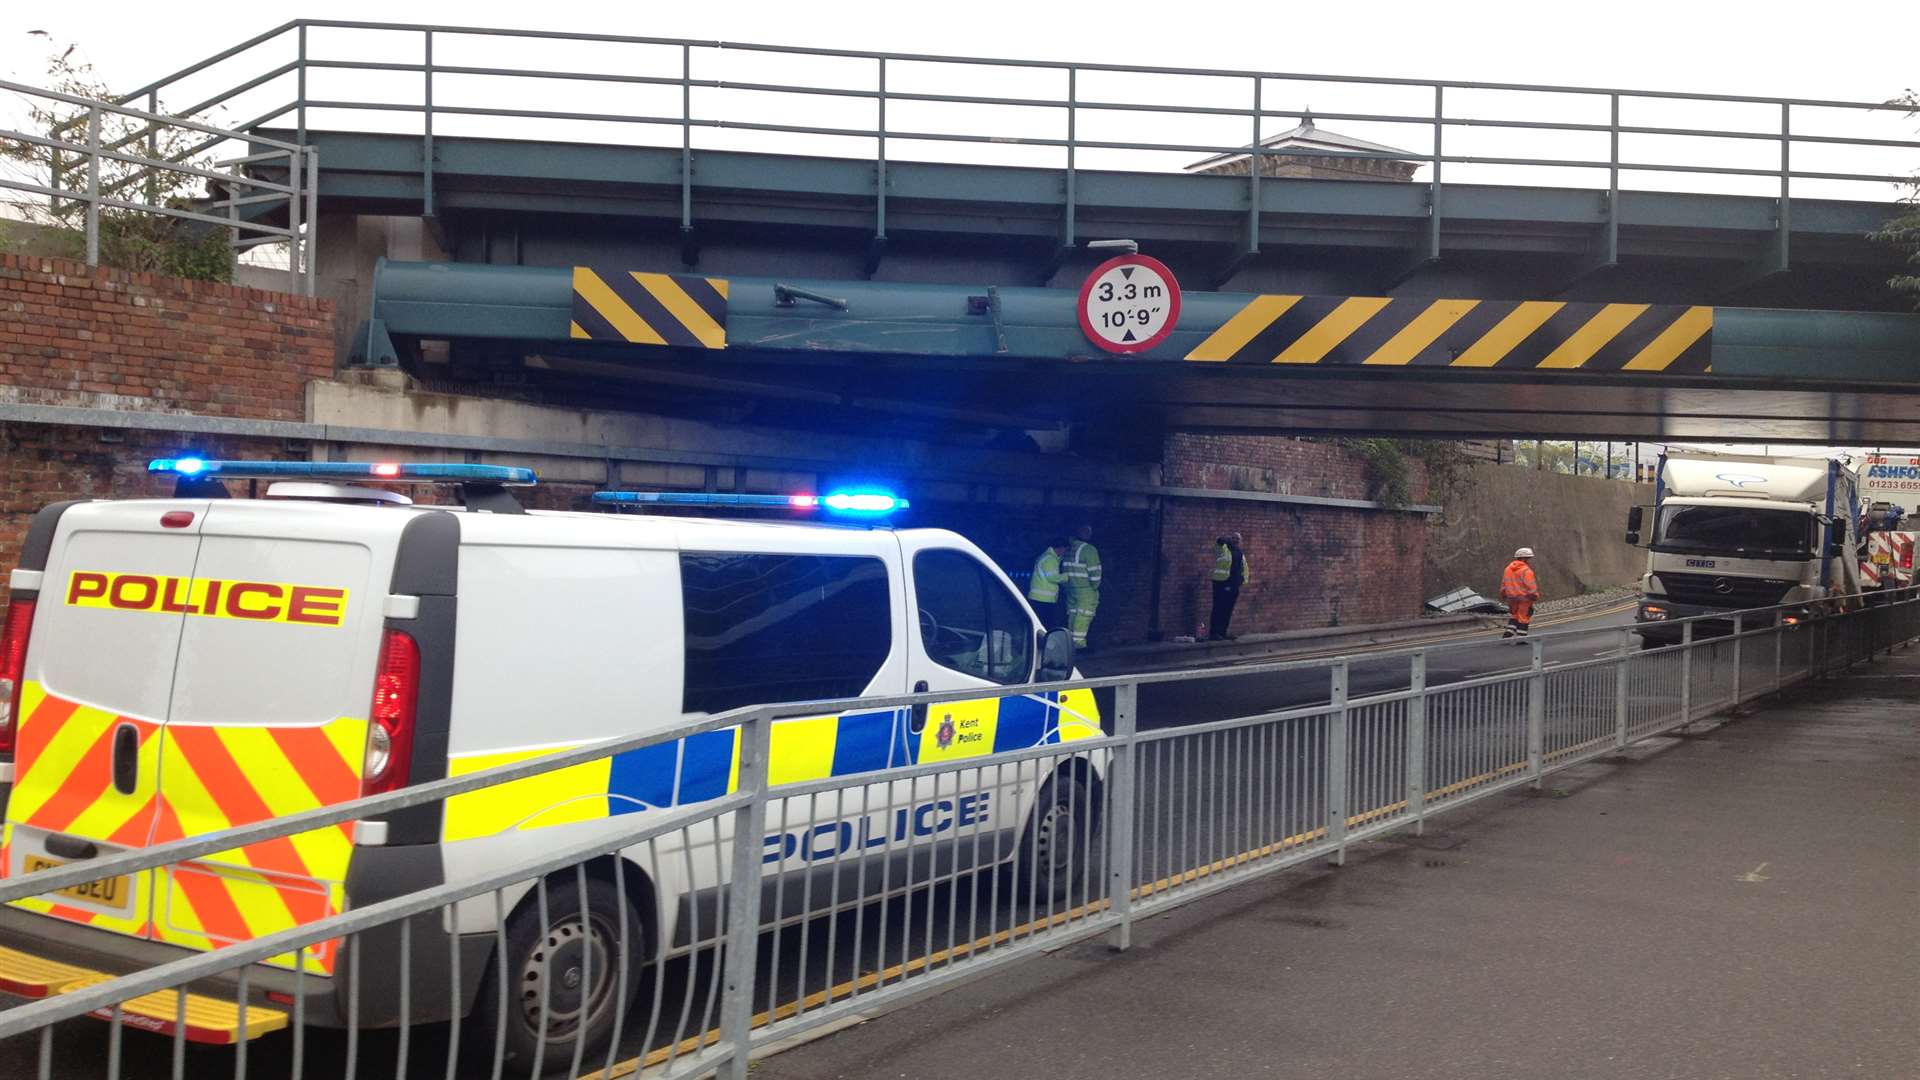 The lorry became wedged under the Newtown Railway Bridge